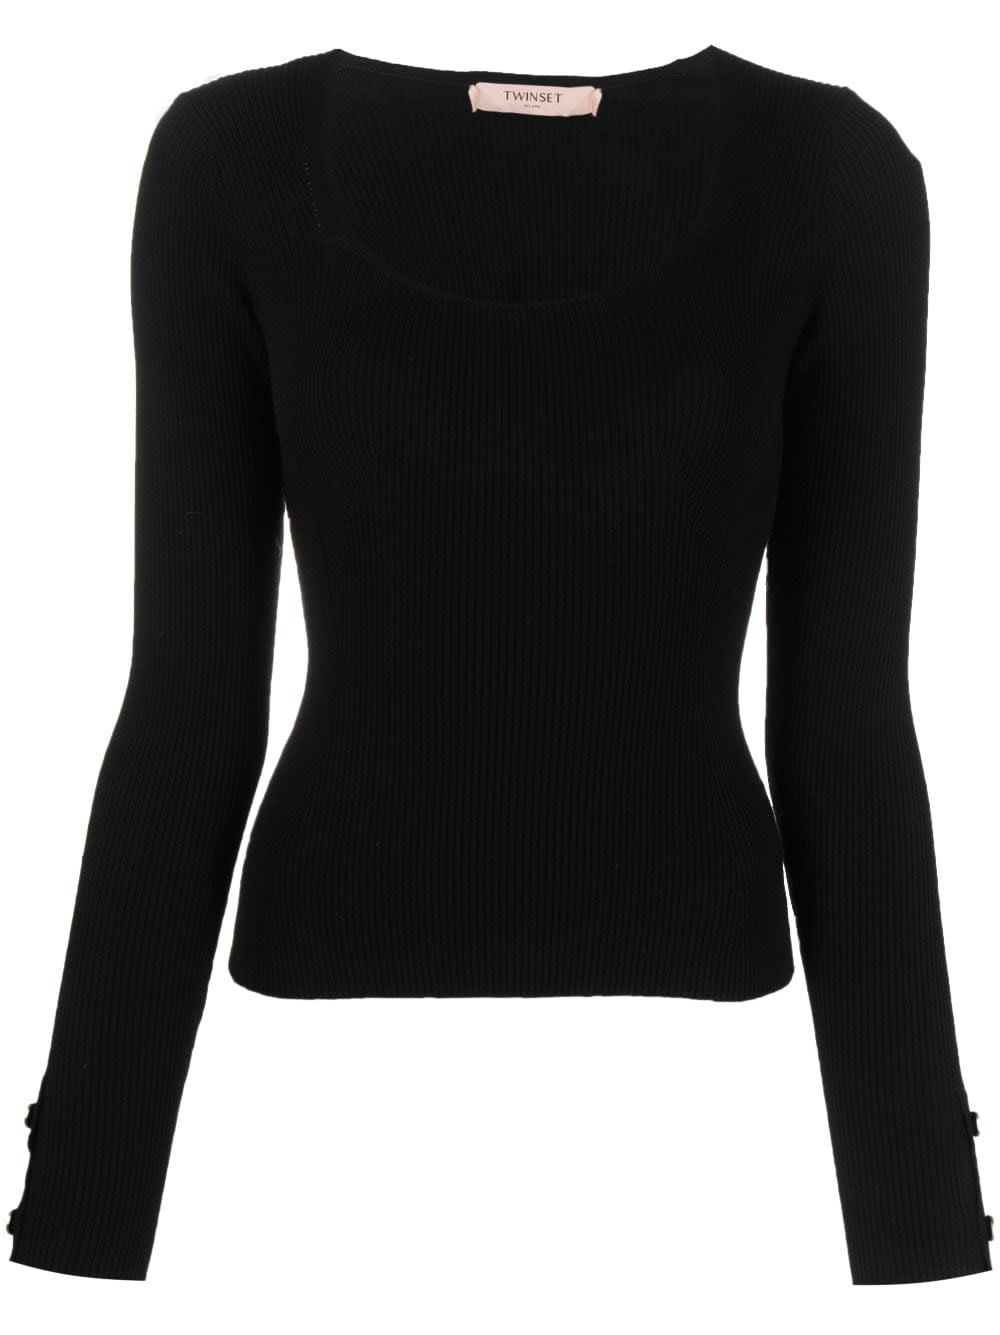 TWINSET LONG SLEEVES SWEATER